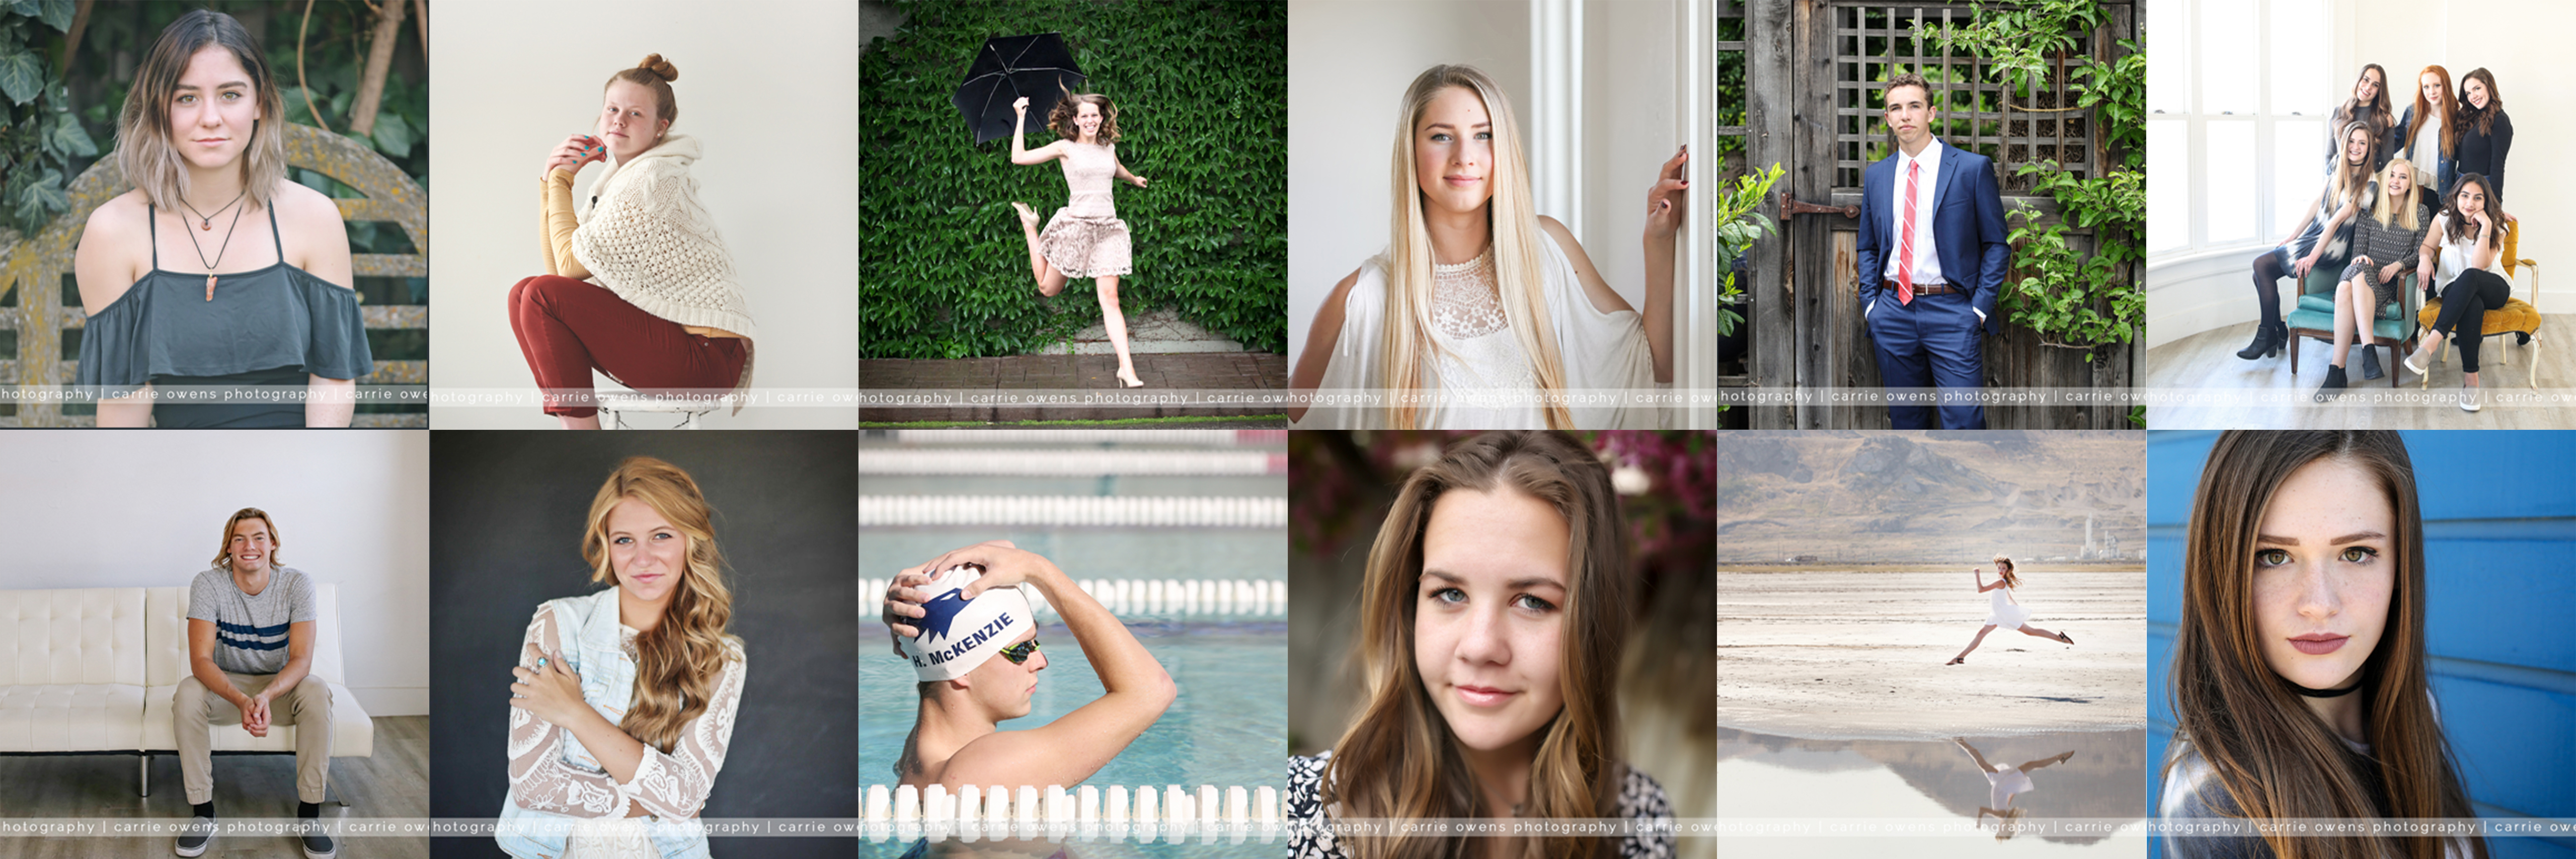 utah high school teen photographer shares why she loves photographing teens